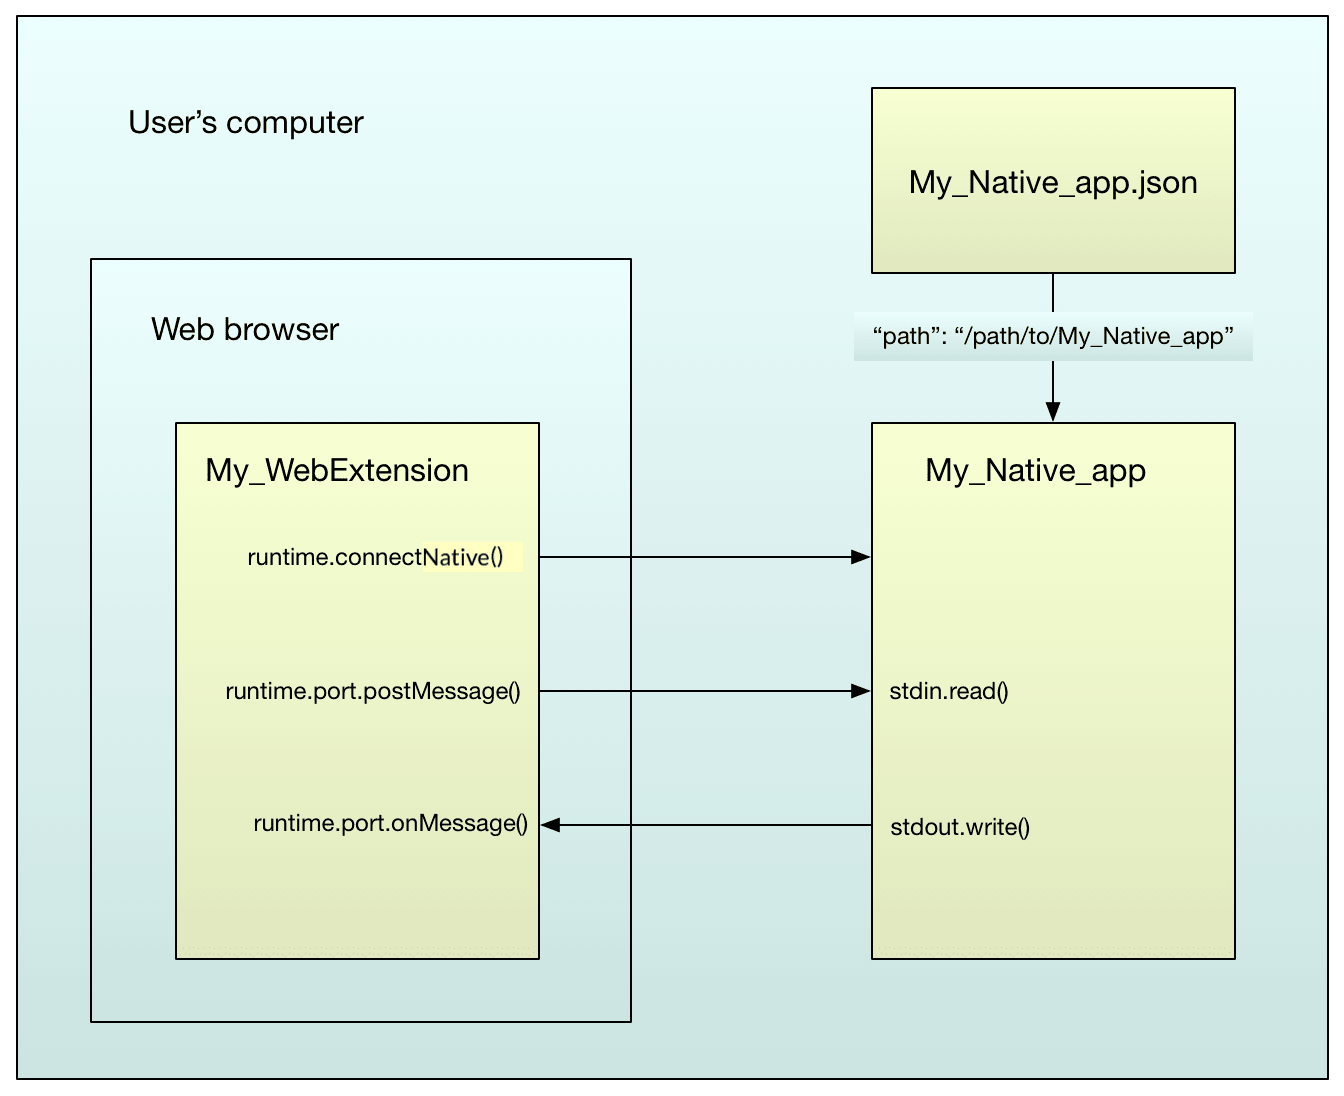 Application flow: the native app JSON file resides on the users computer, providing resource information to the native application. The read and write functions of the native application interact with the browser extension's runtime events.